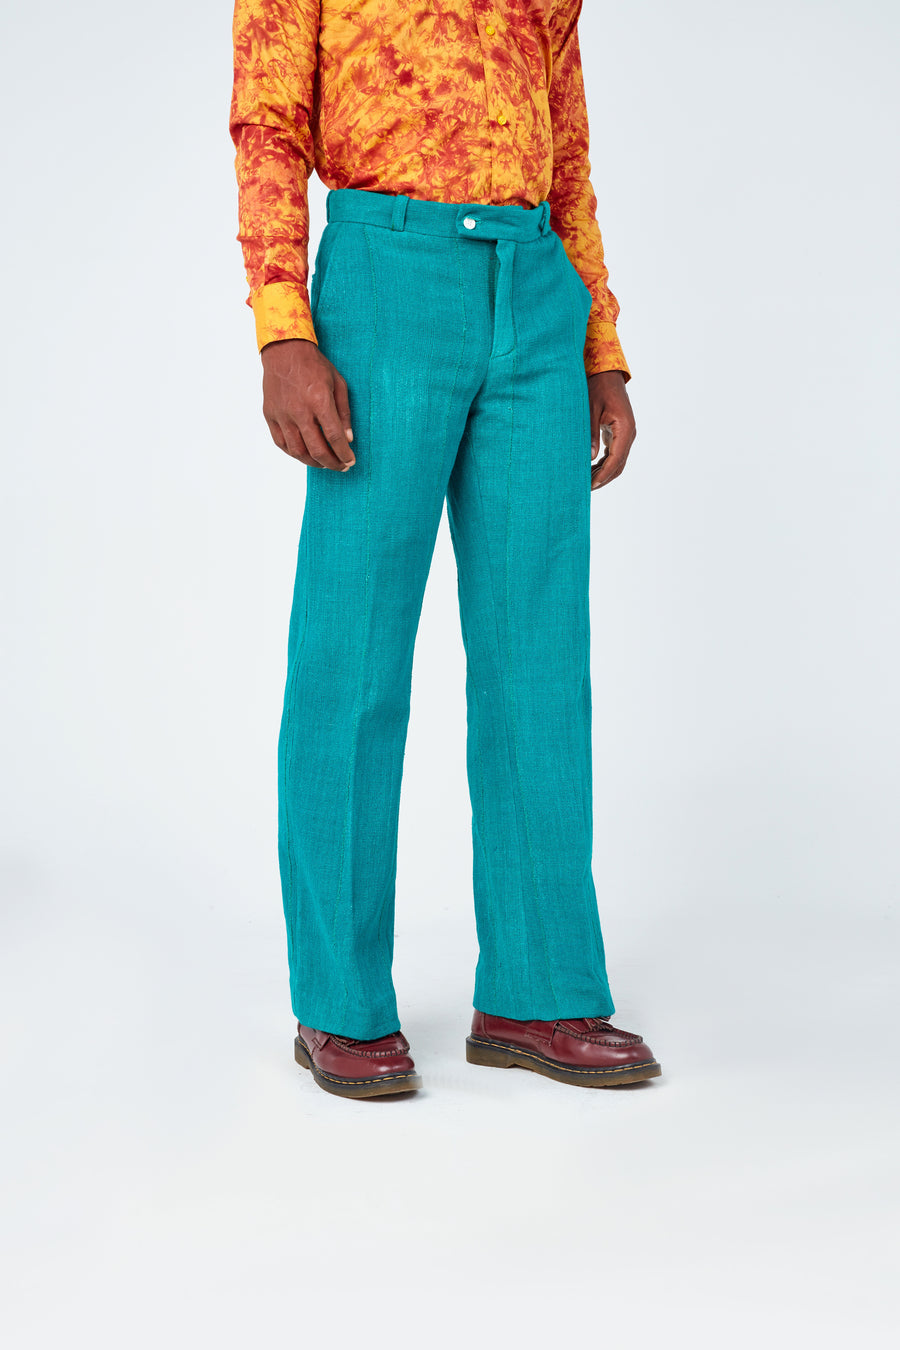 Fela III Tailor Fitted Straight Cut Pant -  Green